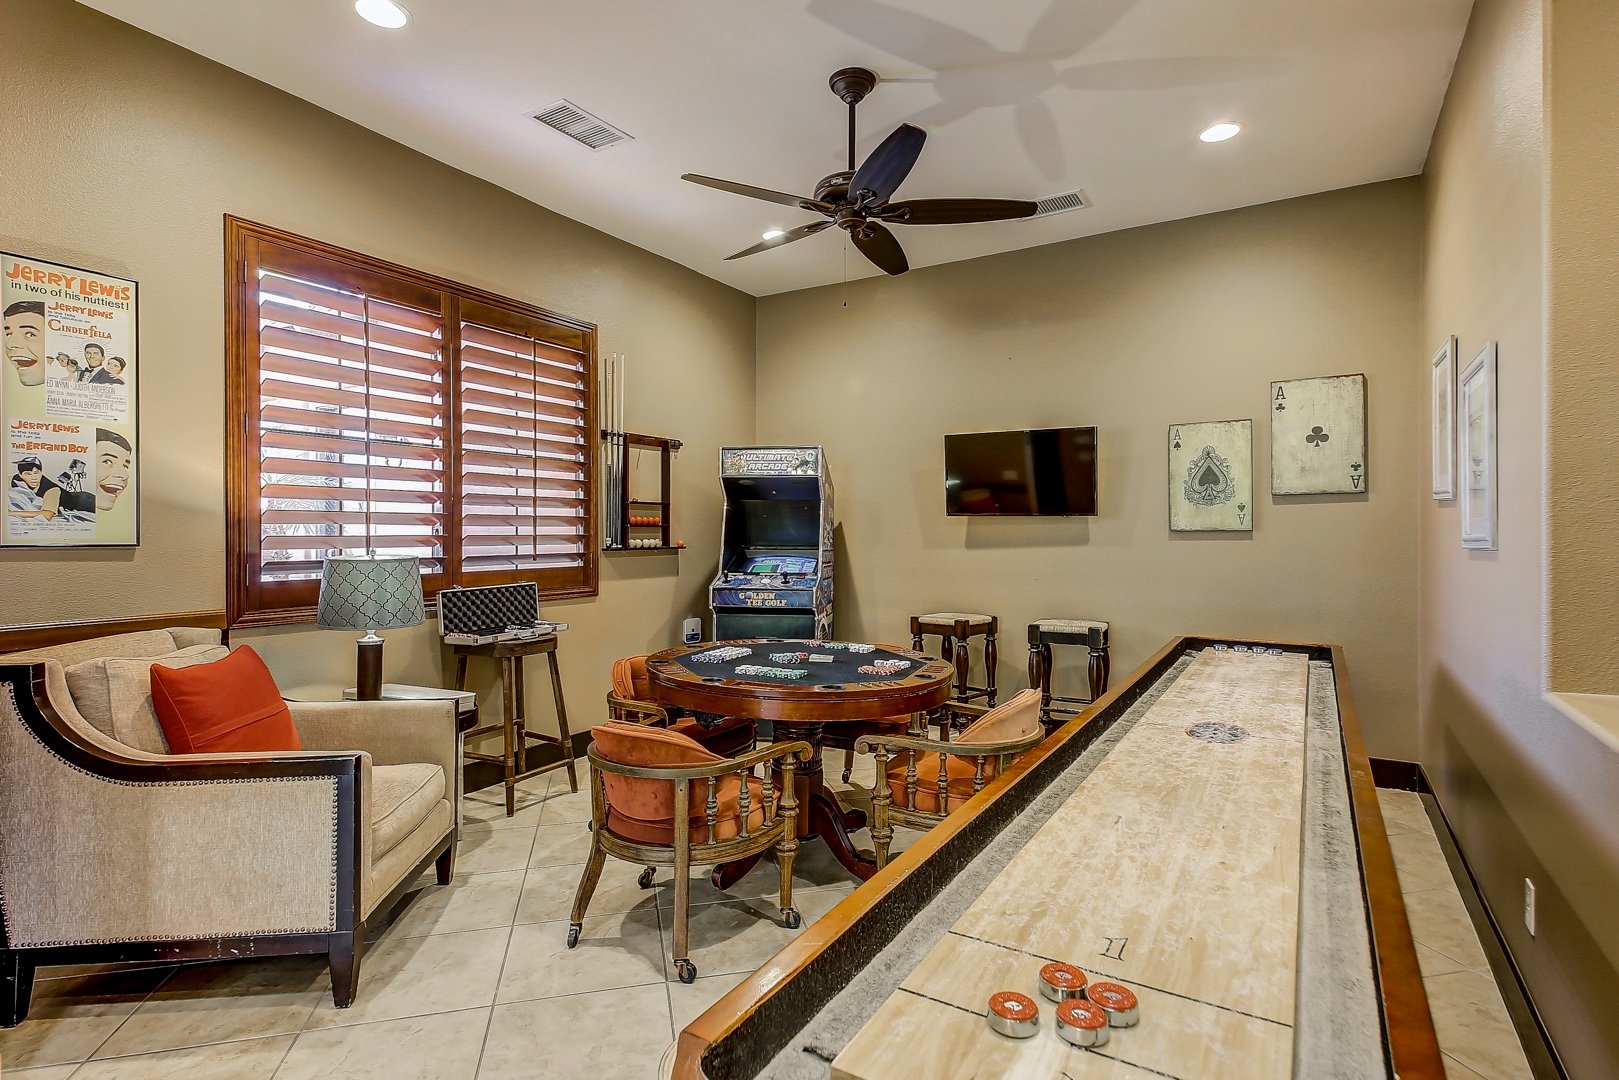 Man cave type game room with shuffleboard, stand up retro 80's video game machine, TV, poker table, and more.